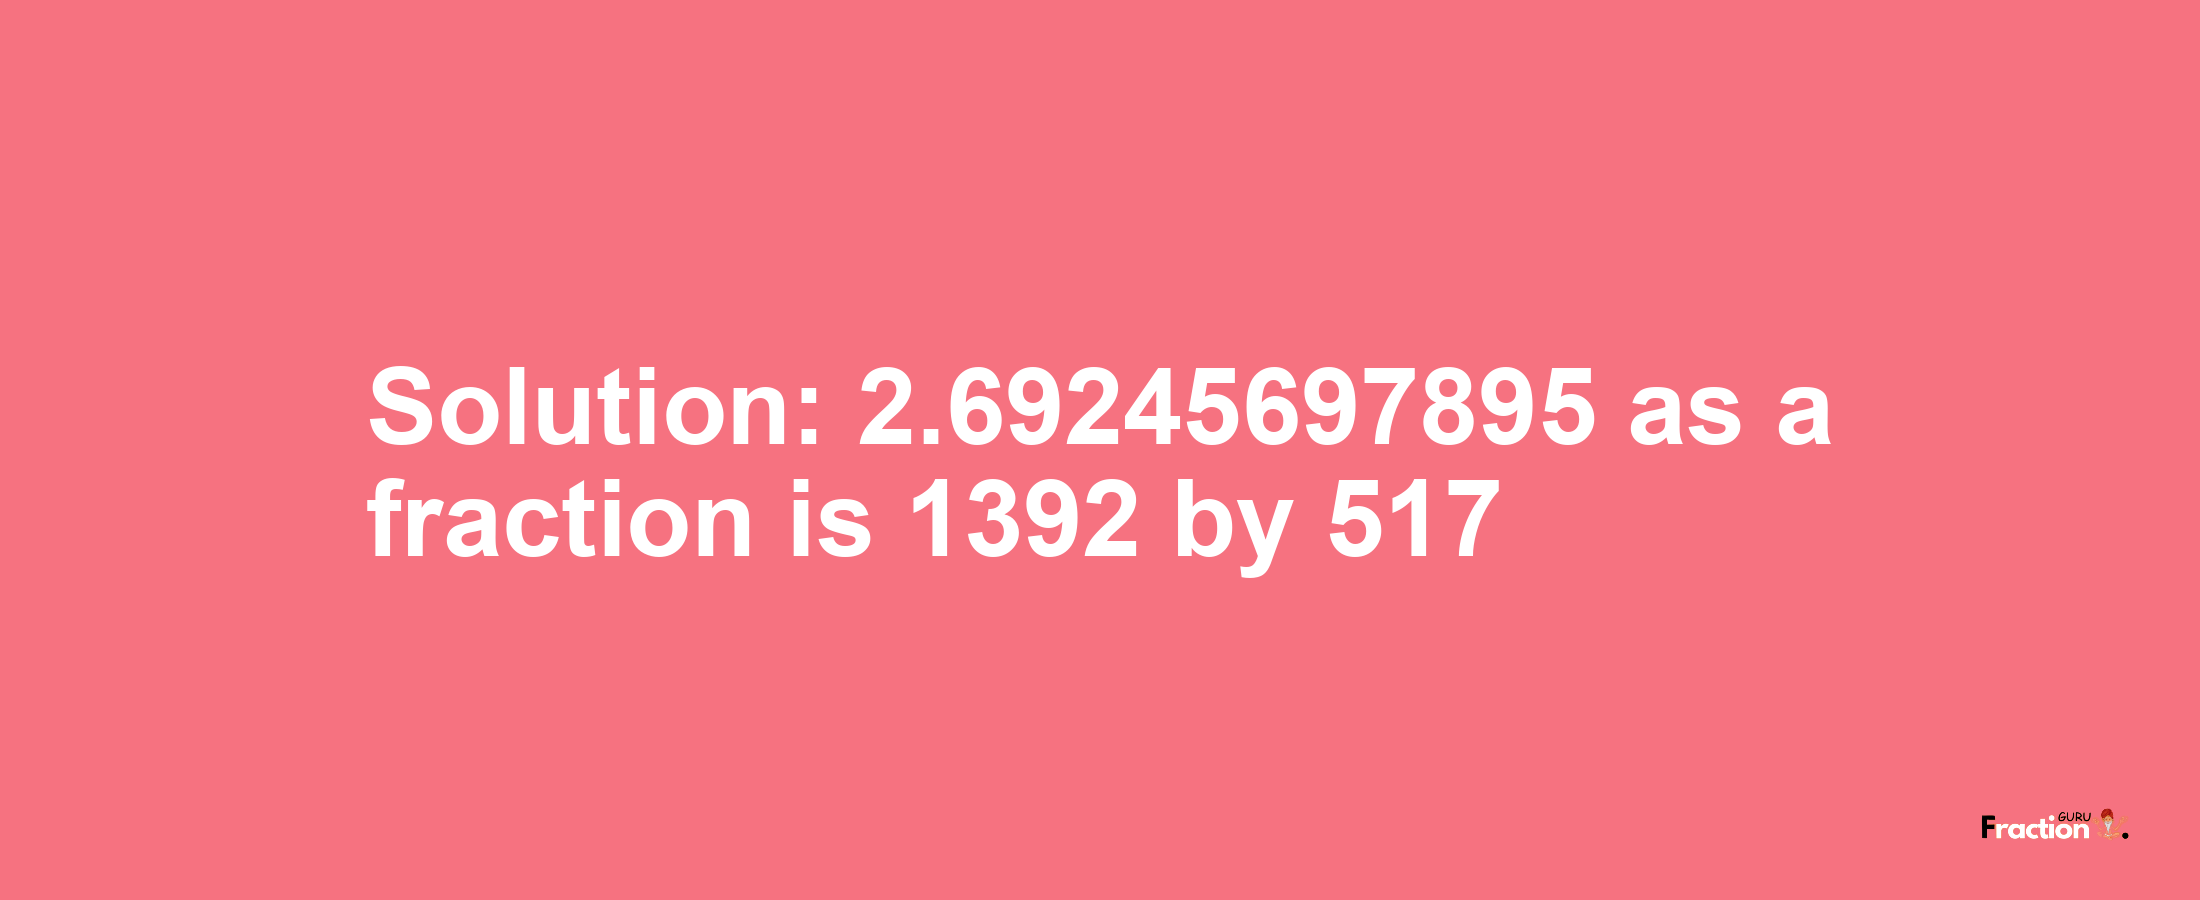 Solution:2.69245697895 as a fraction is 1392/517